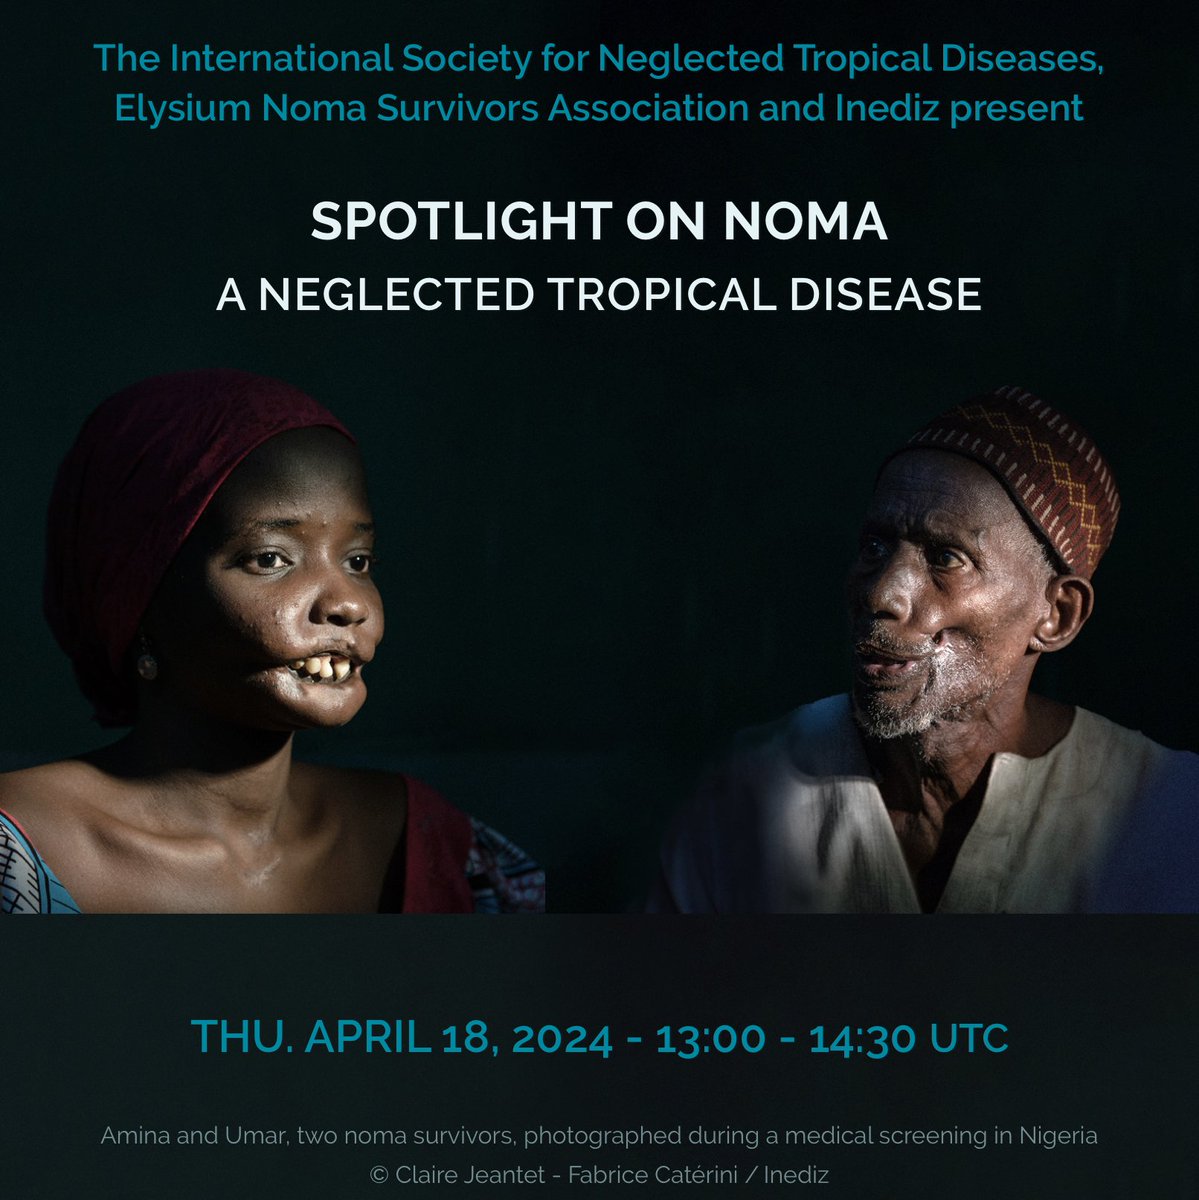 📢Save the date: in Dec 2023, news went round the world that #noma was officially recognised as a Neglected Tropical Disease! Join us and learn: what is noma and what next to tackle this devastating disease? 👉Spotlight on Noma 👉Apr 18 | 13:00-14:30 UTC tinyurl.com/SpotlightNoma